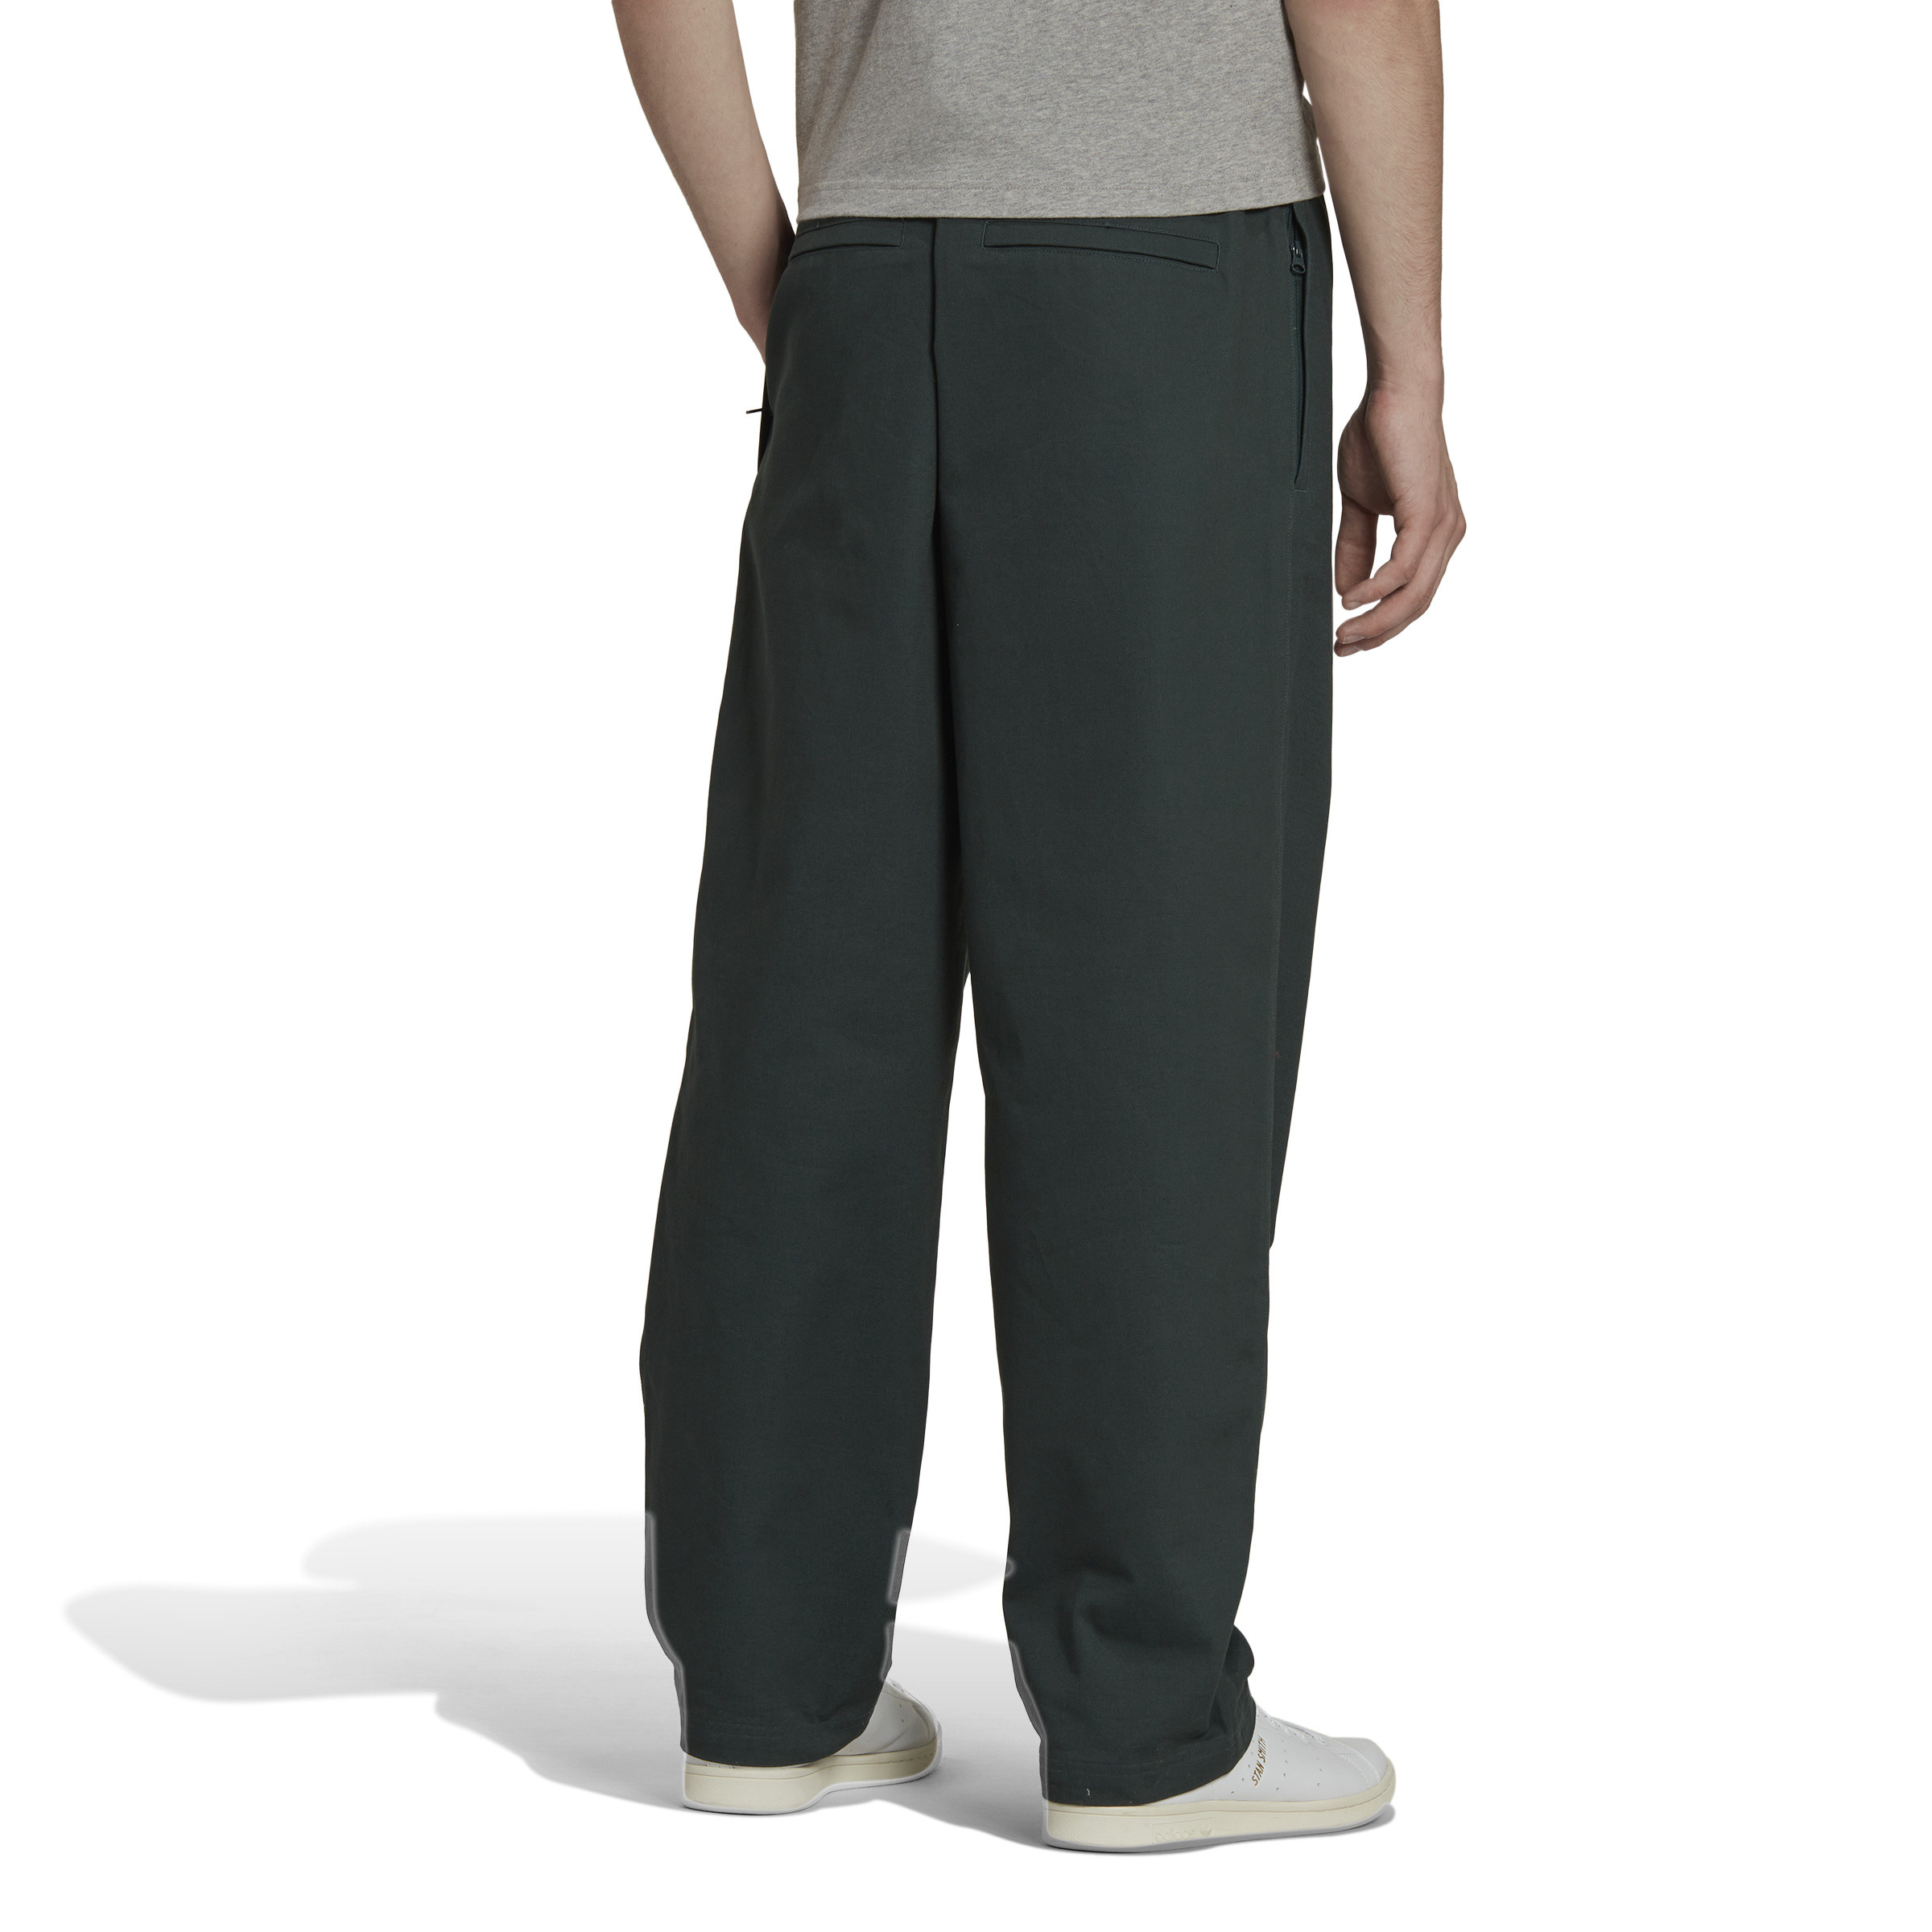 Adidas - Chino adicolor trousers, Dark Green, large image number 3